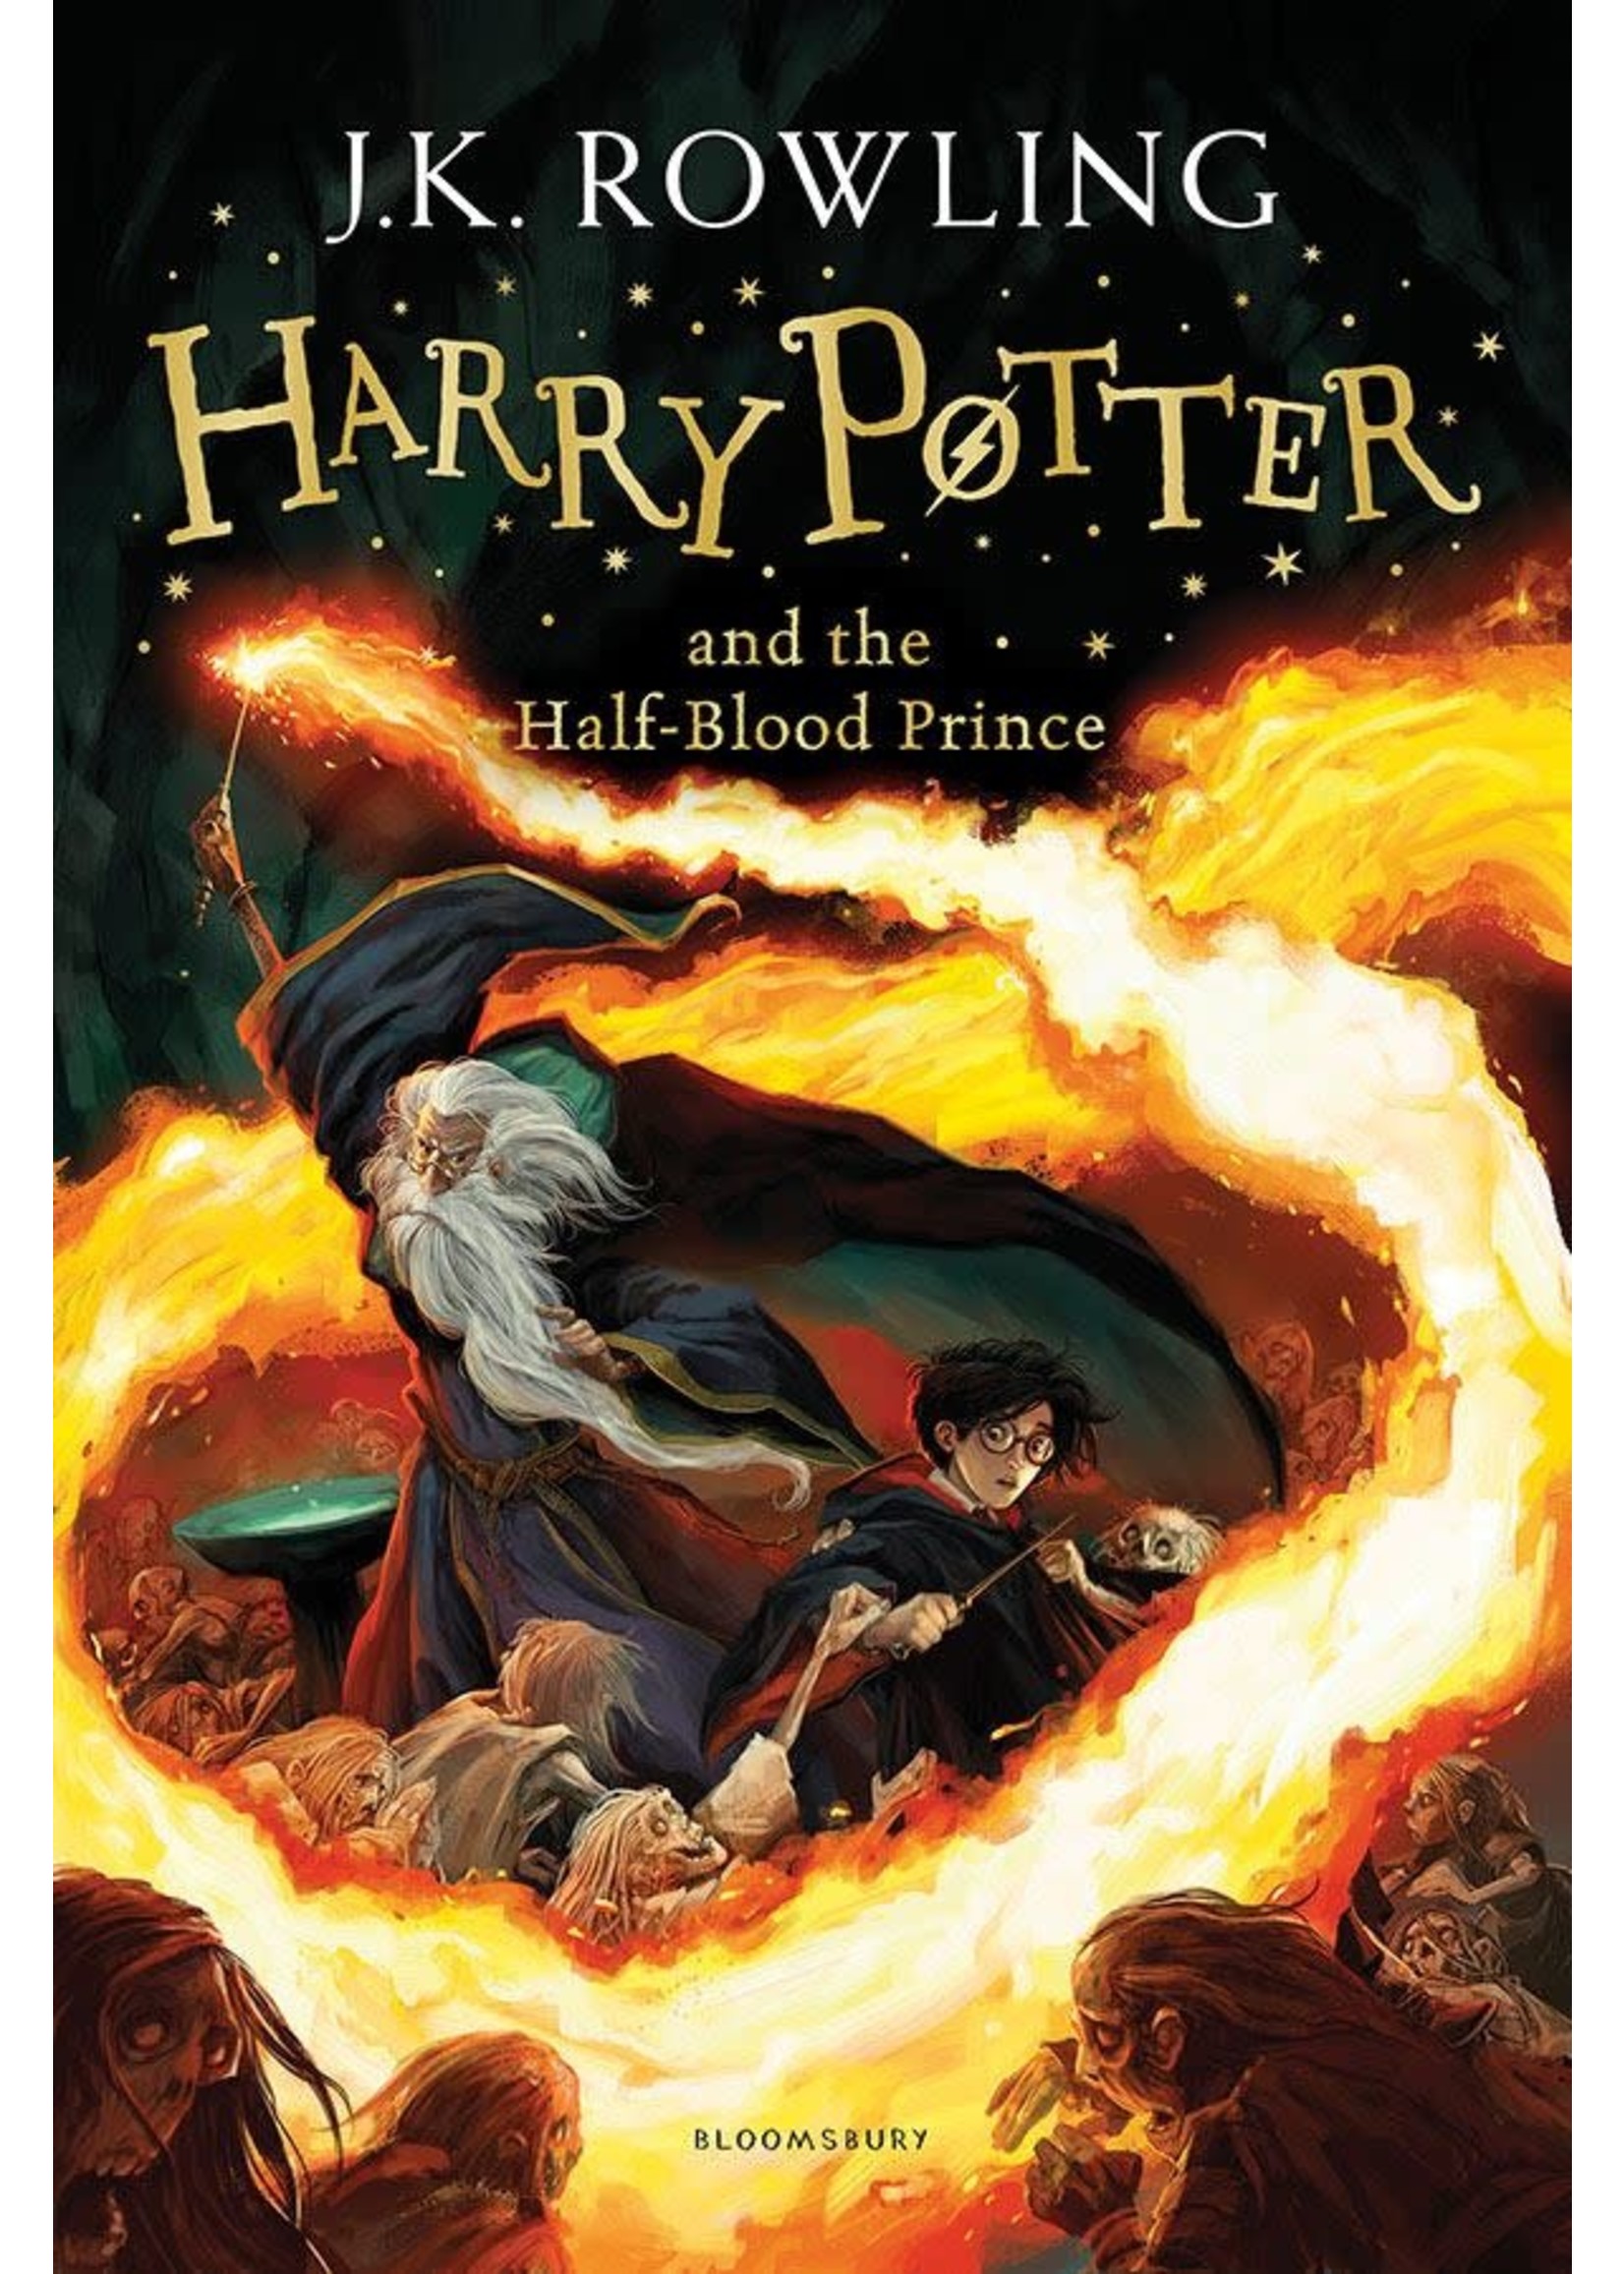 Harry Potter and the Half-Blood Prince (Harry Potter #6) by J.K. Rowling